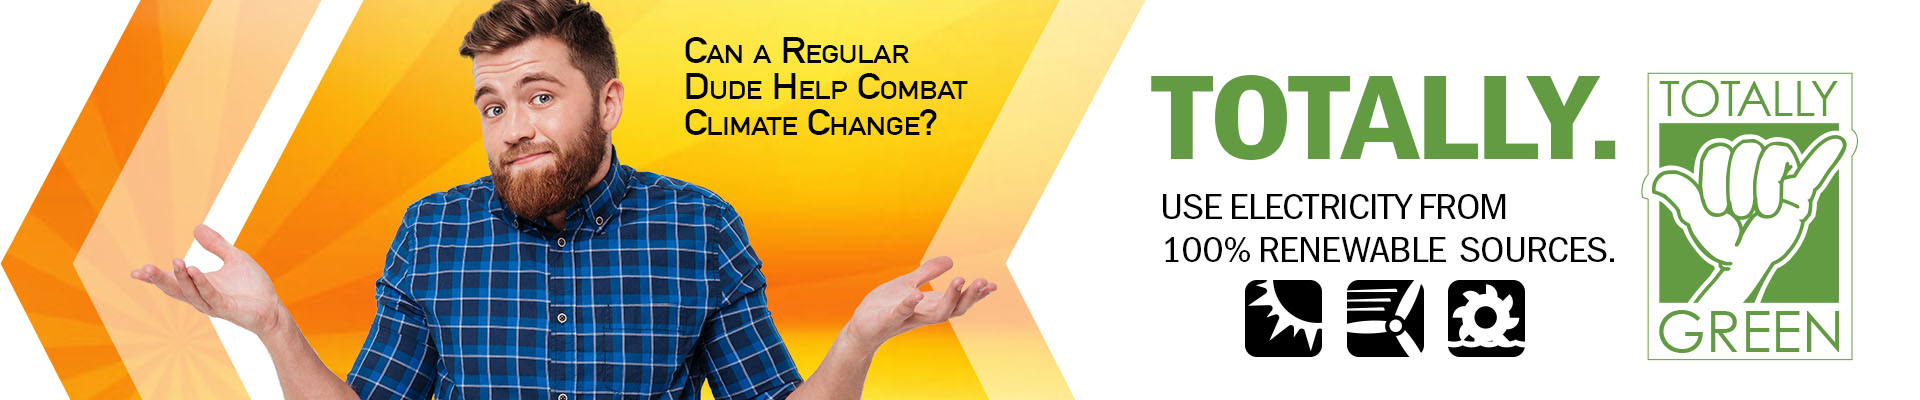 Can a regular dude help combat climate change?  Totally.  Learn about Totally Green.